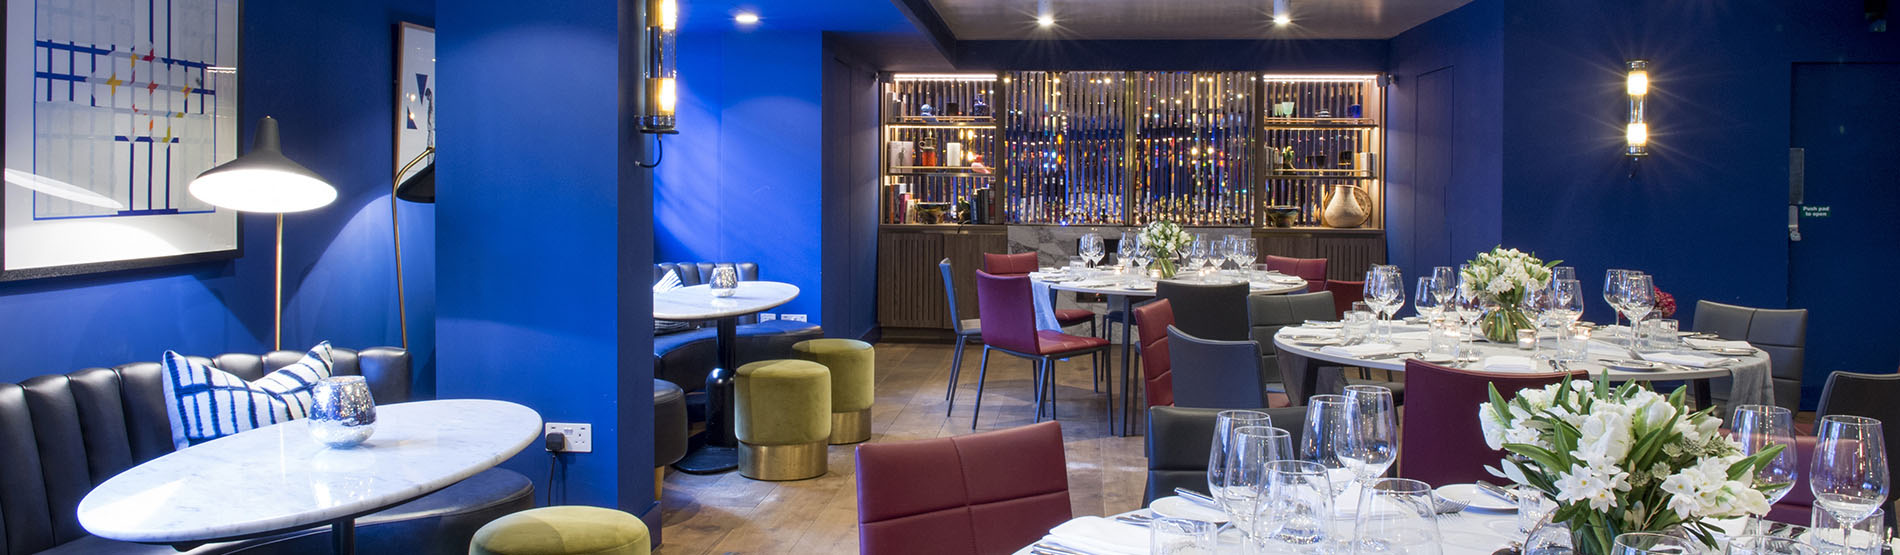 The blue room at The Marylebone